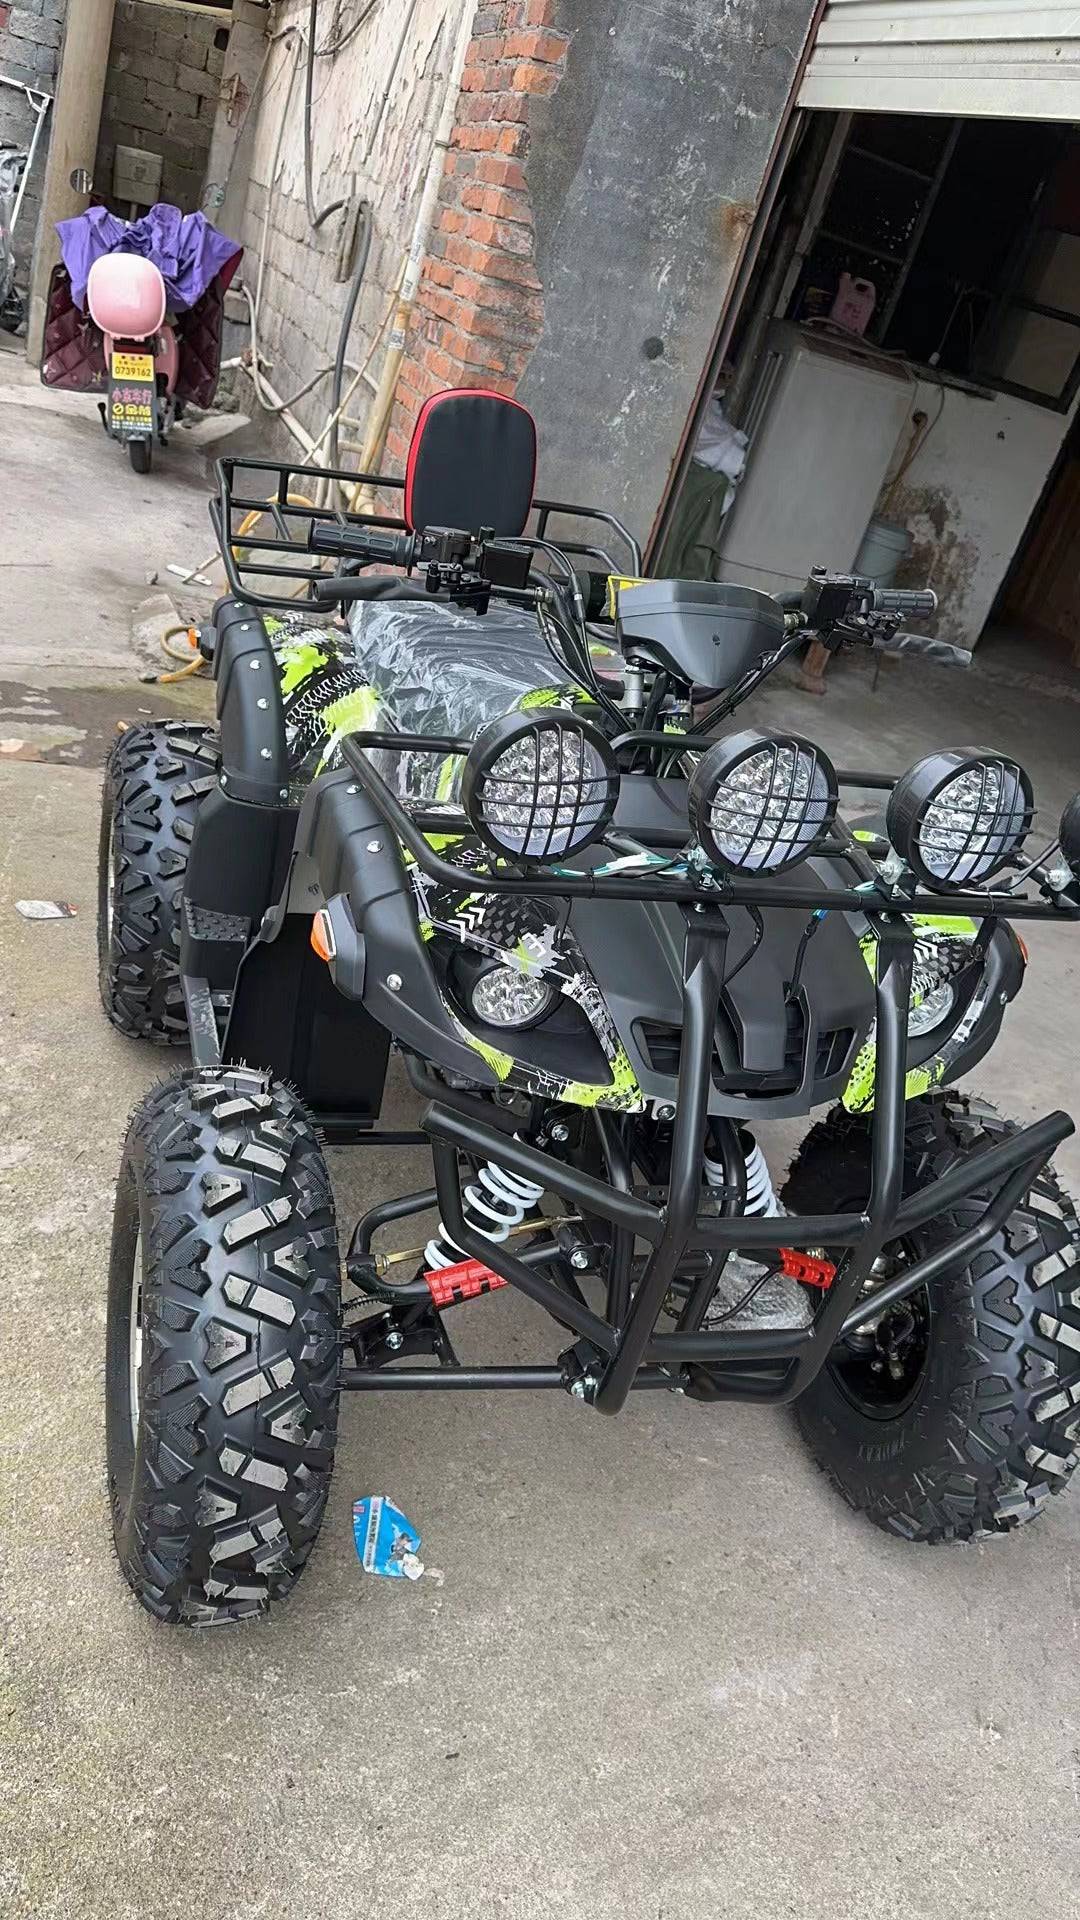 COOLBABY A7-013 ATV 200cc Dune Buggy 2 Stroke Single Cylinder, Air Cooled Engine 4 Wheelers Quad Bike All Terrain Quadricycle Off-road Motorcycle - COOLBABY